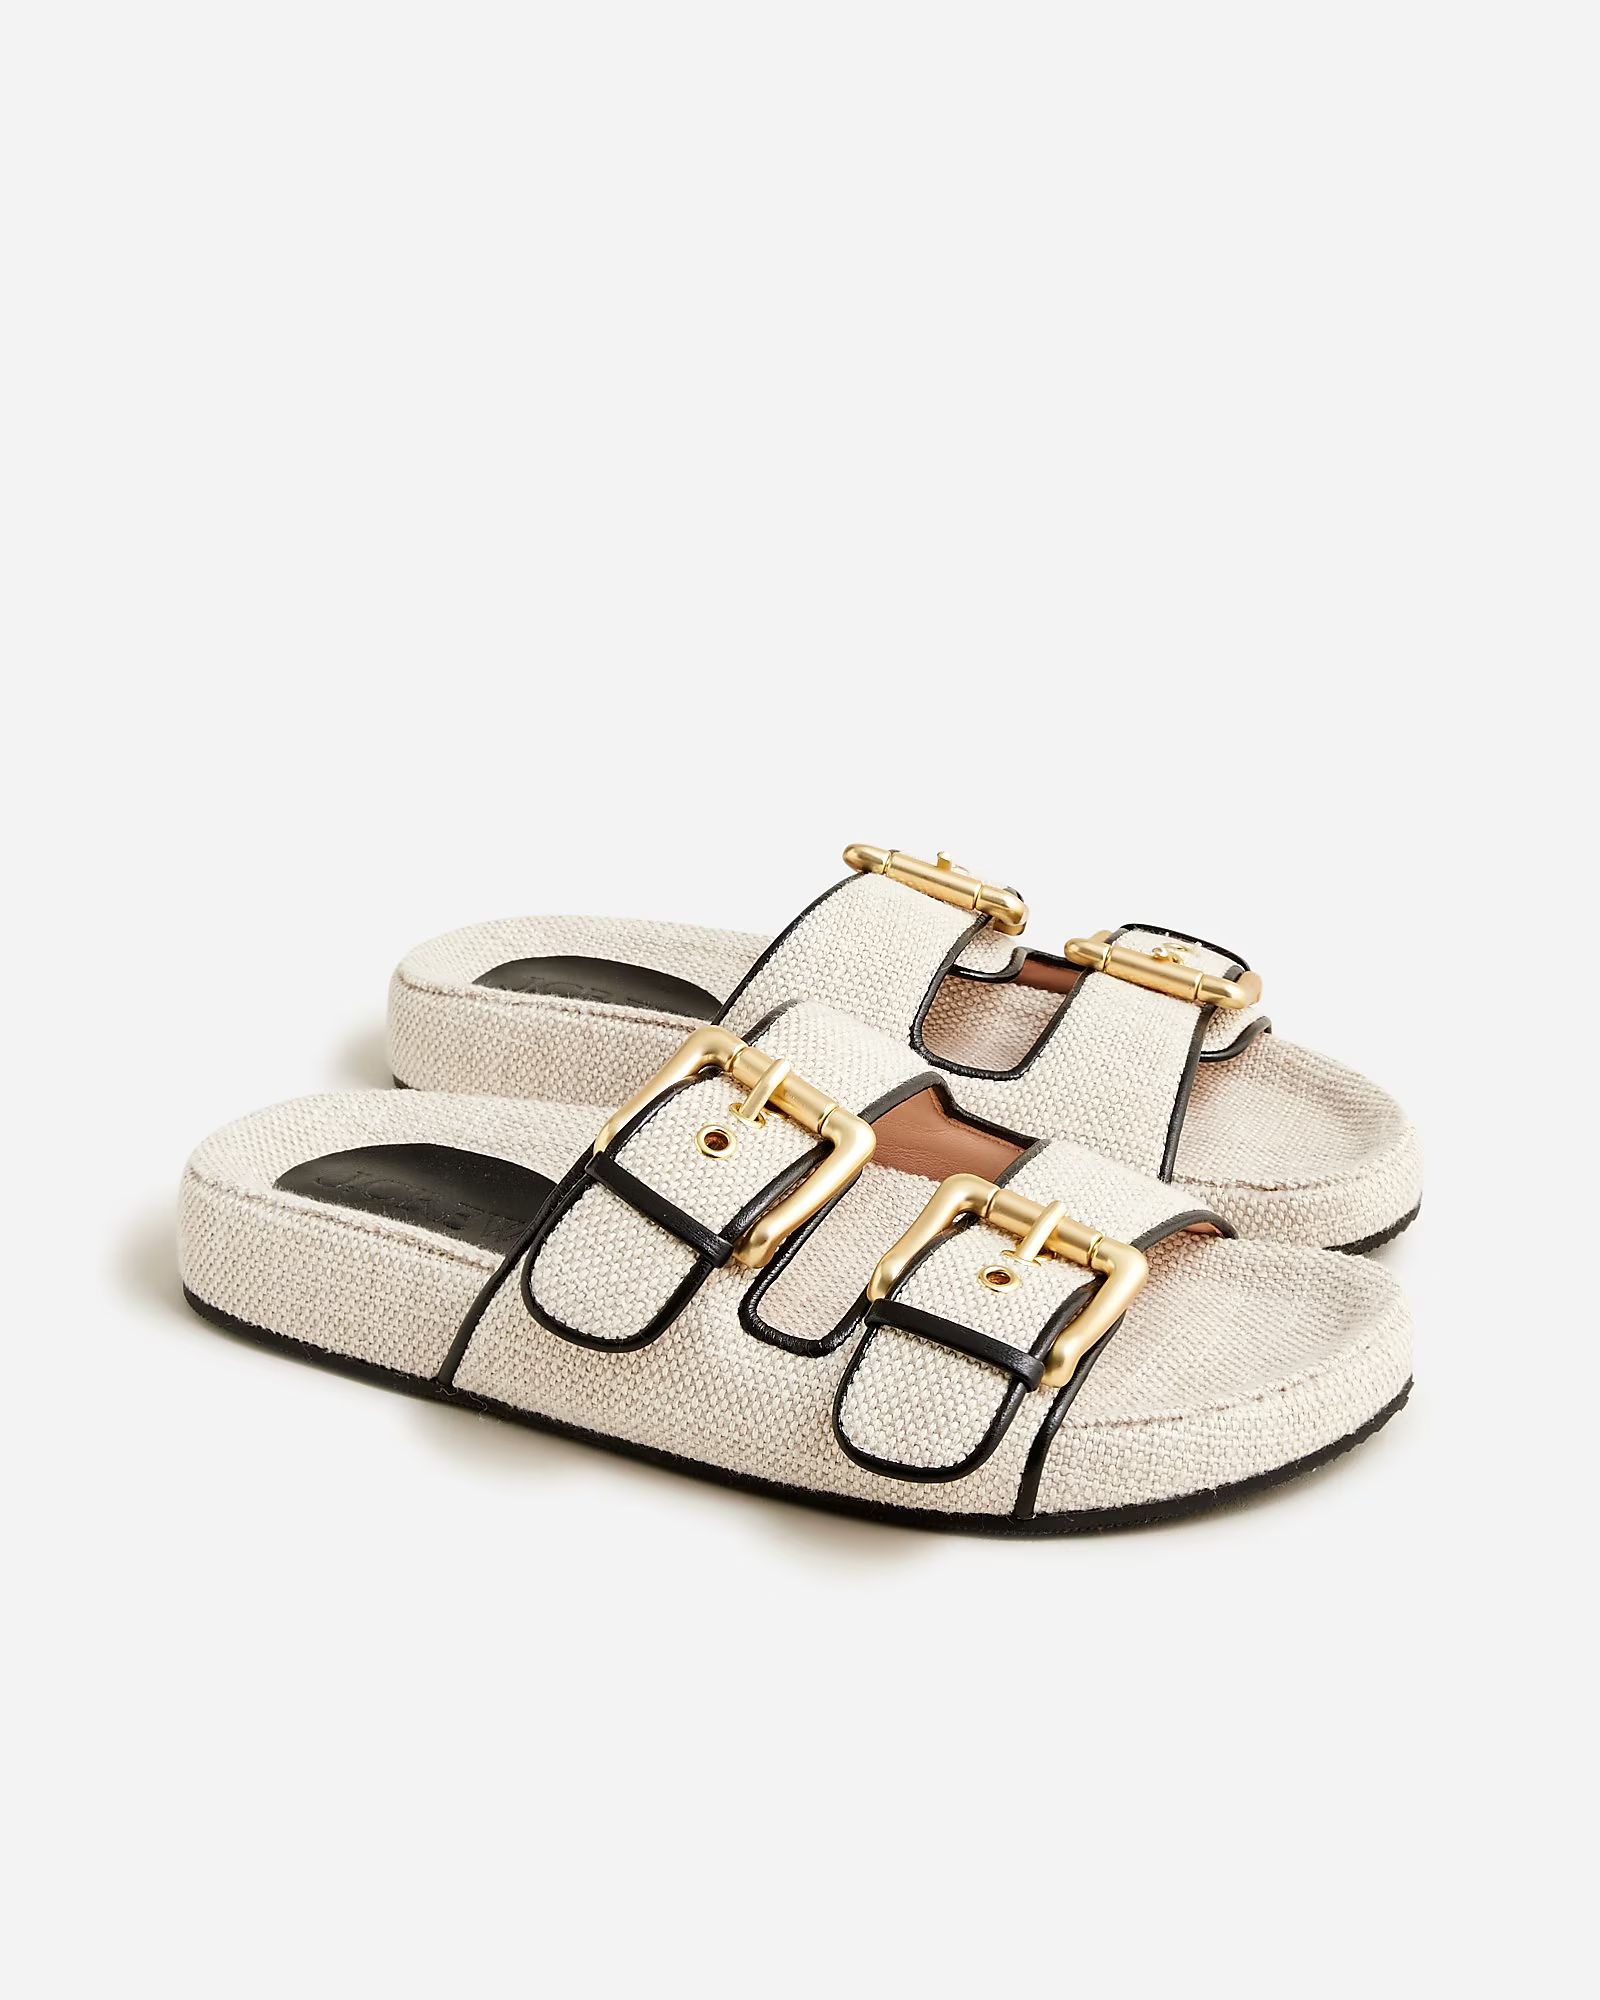 Marlow buckle sandals in canvas | J.Crew US